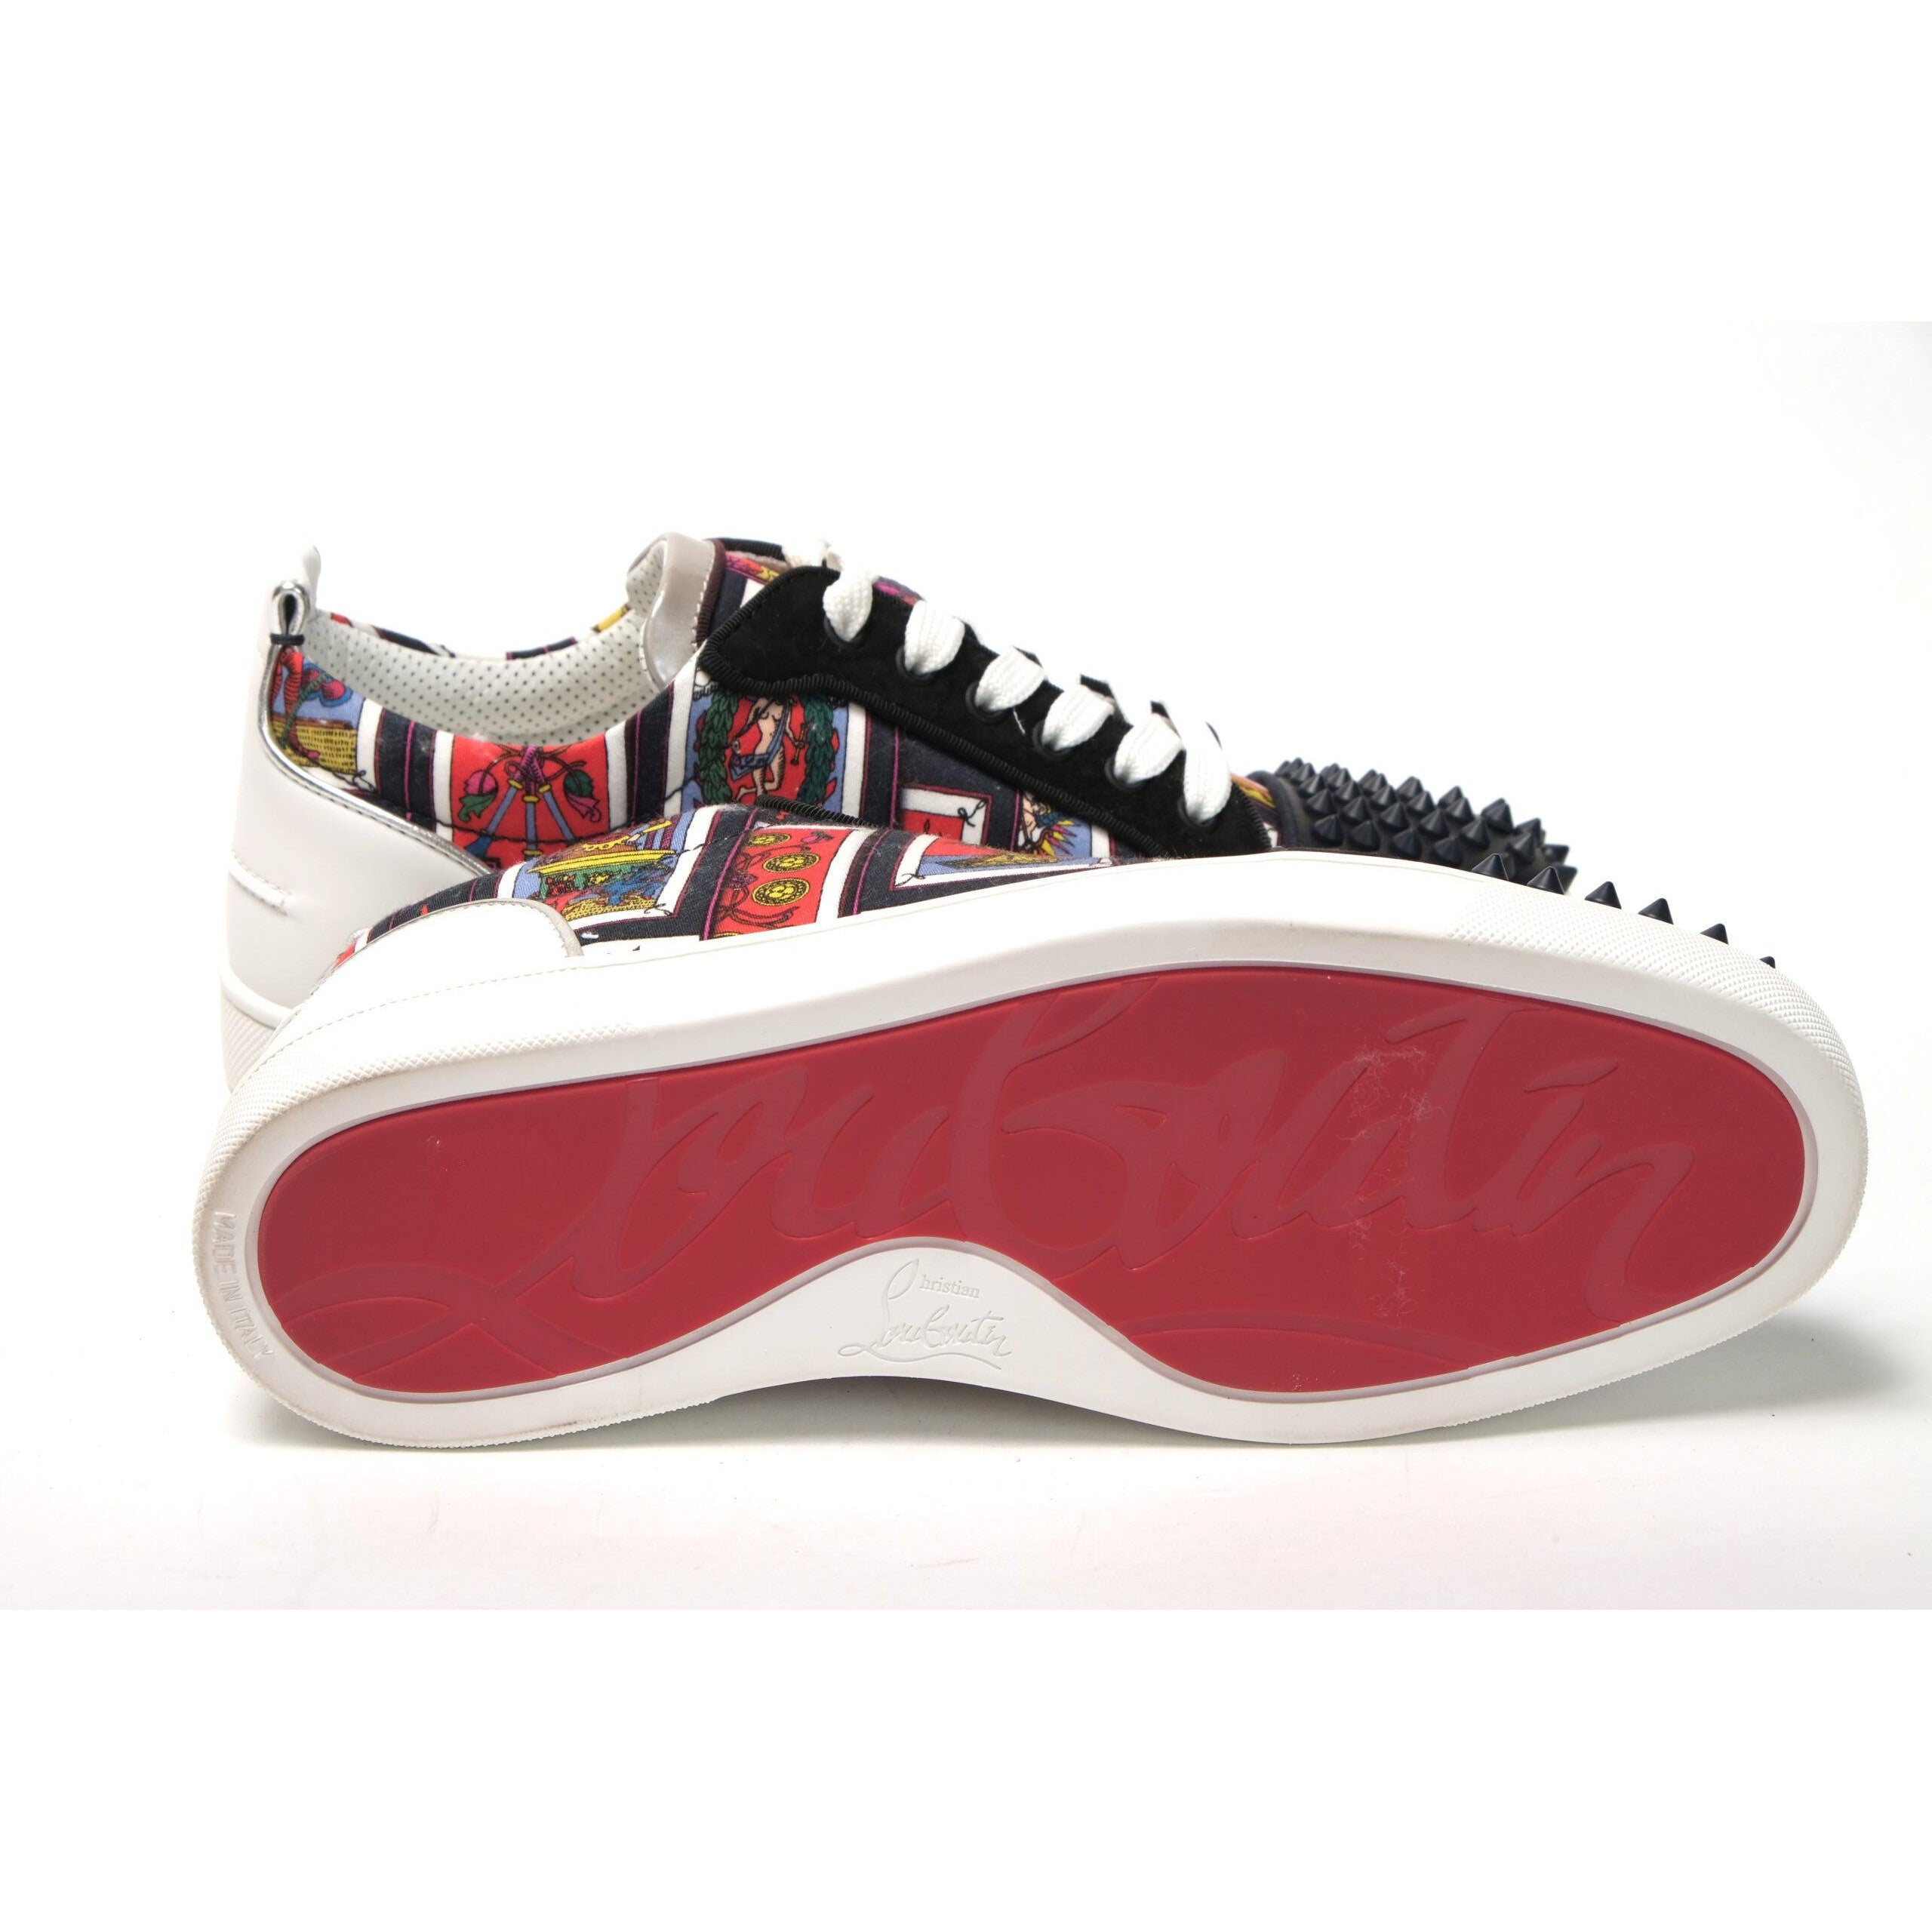 Christian Louboutin Red Louis Junior Spikes Sneakers